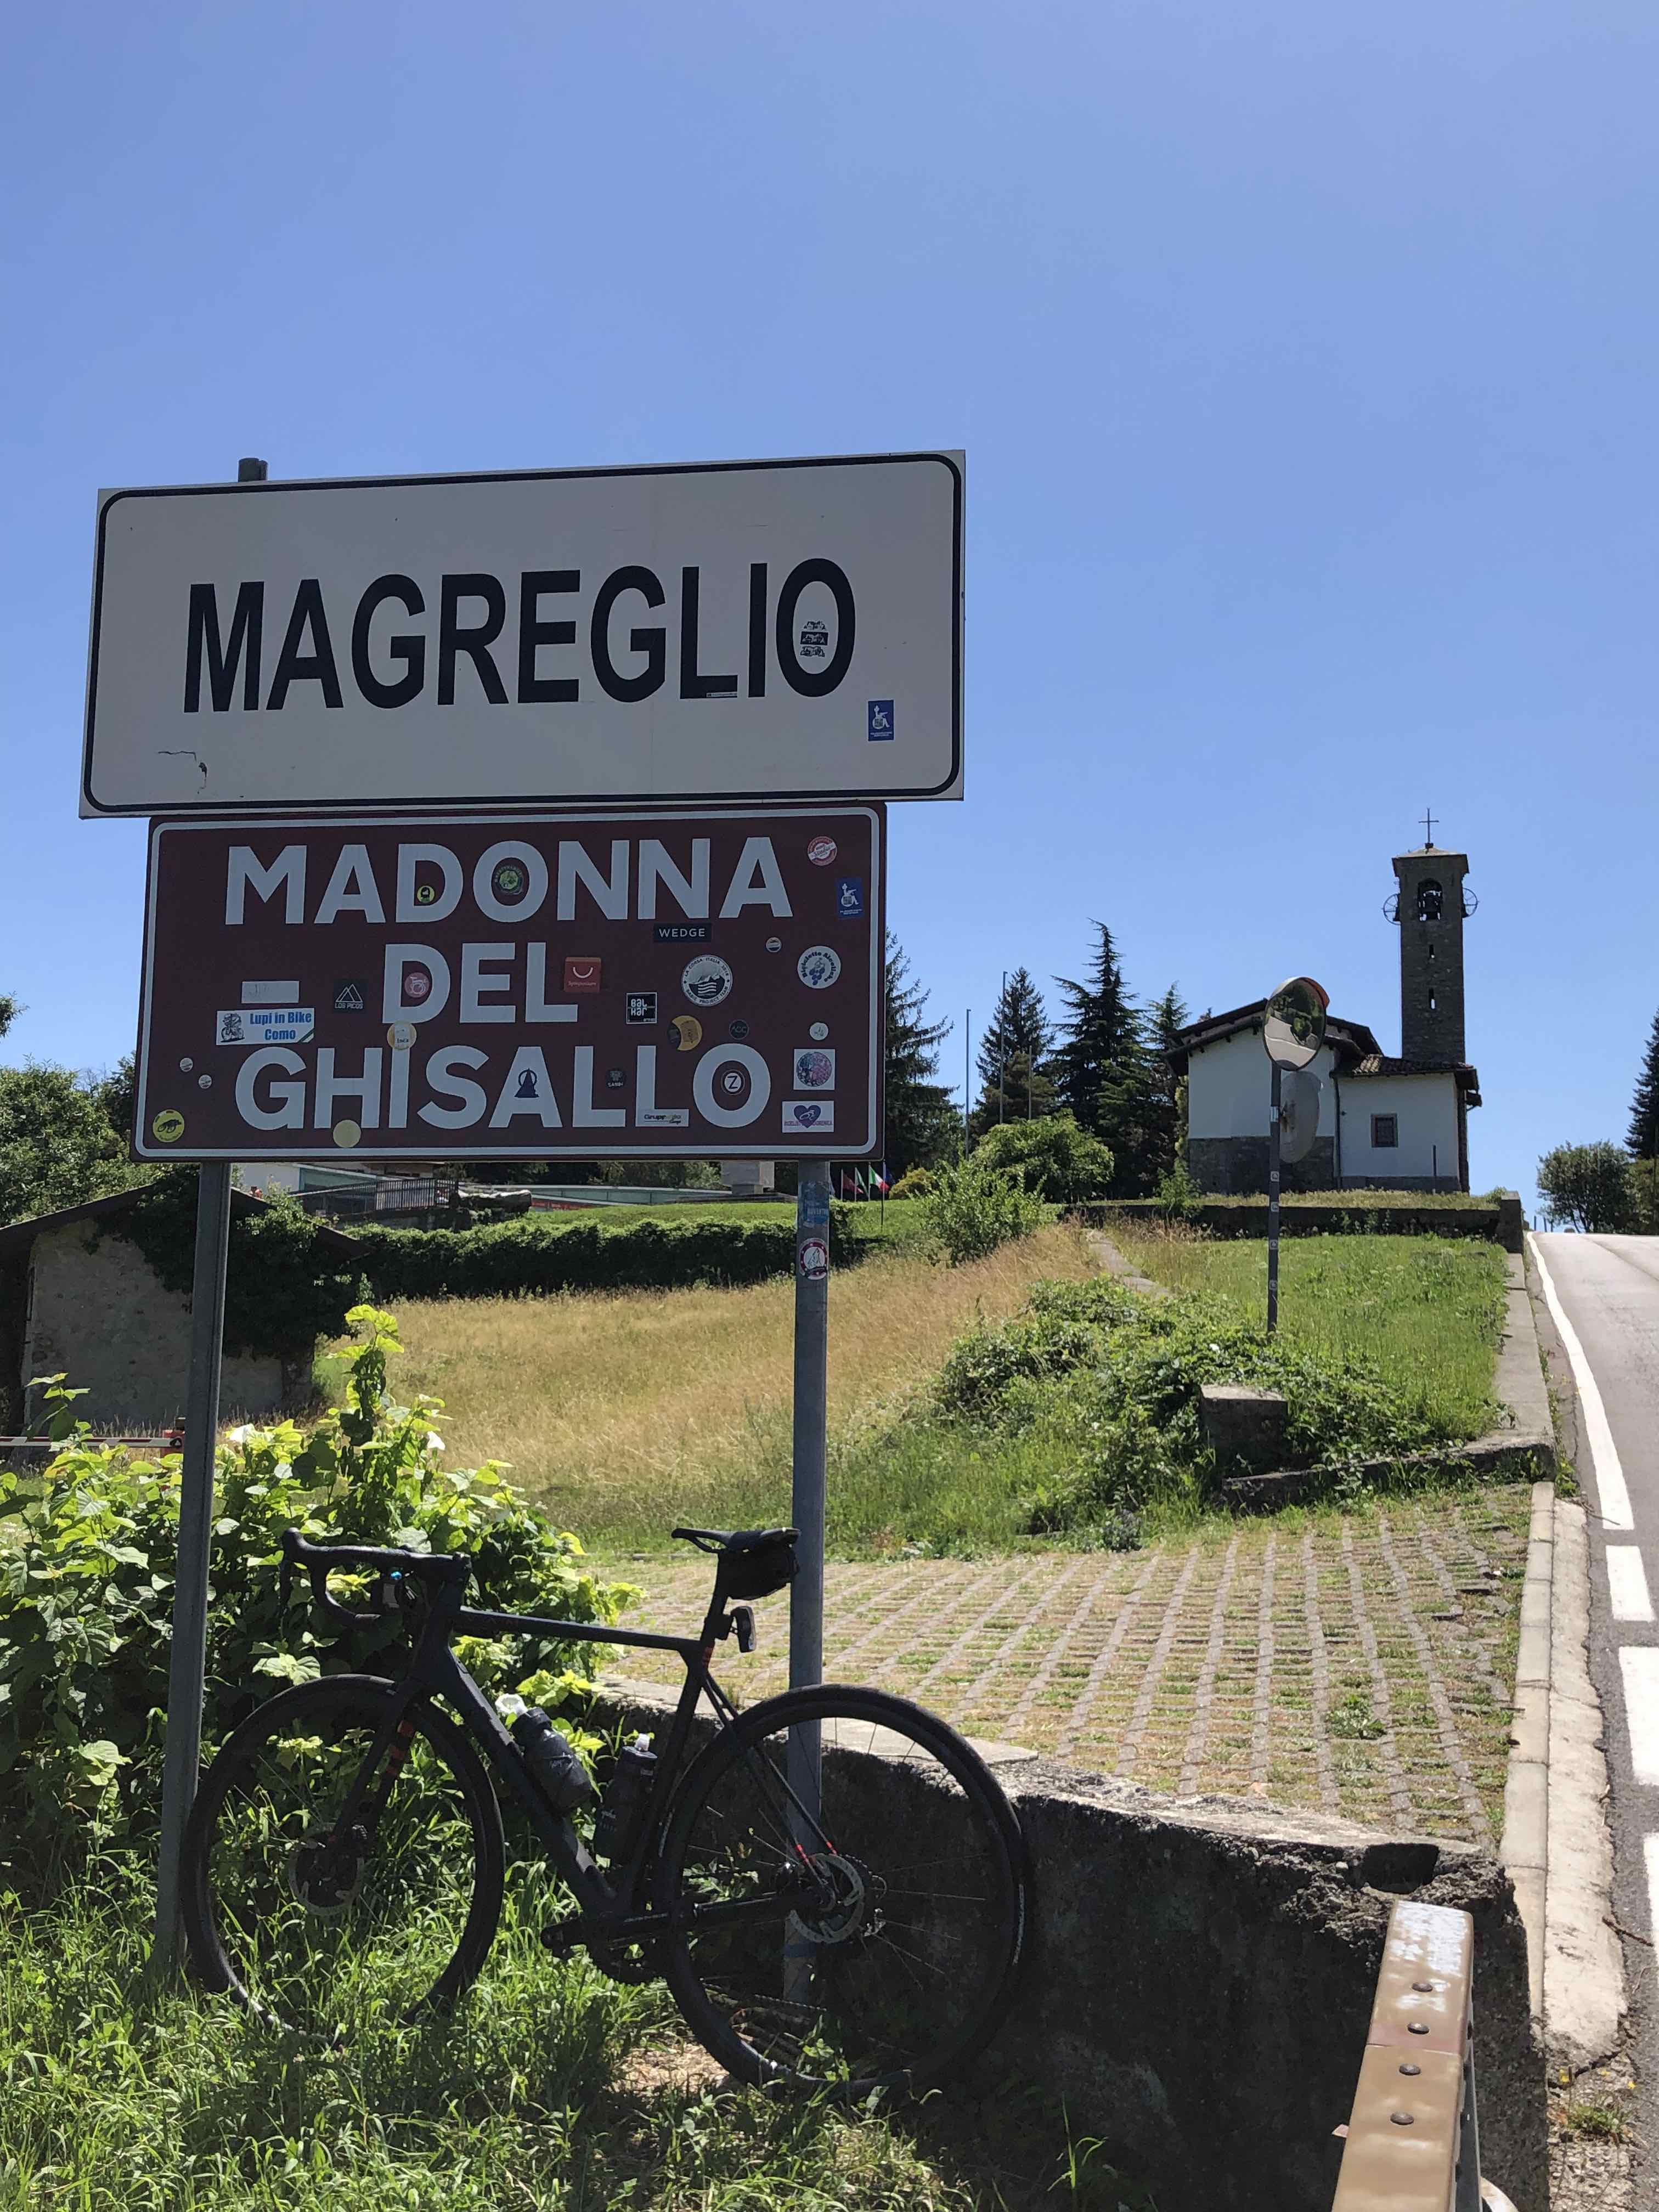 Road sign with bike parked in front marking the location for the Madonna del Ghisallo church near Bellagio, Italy